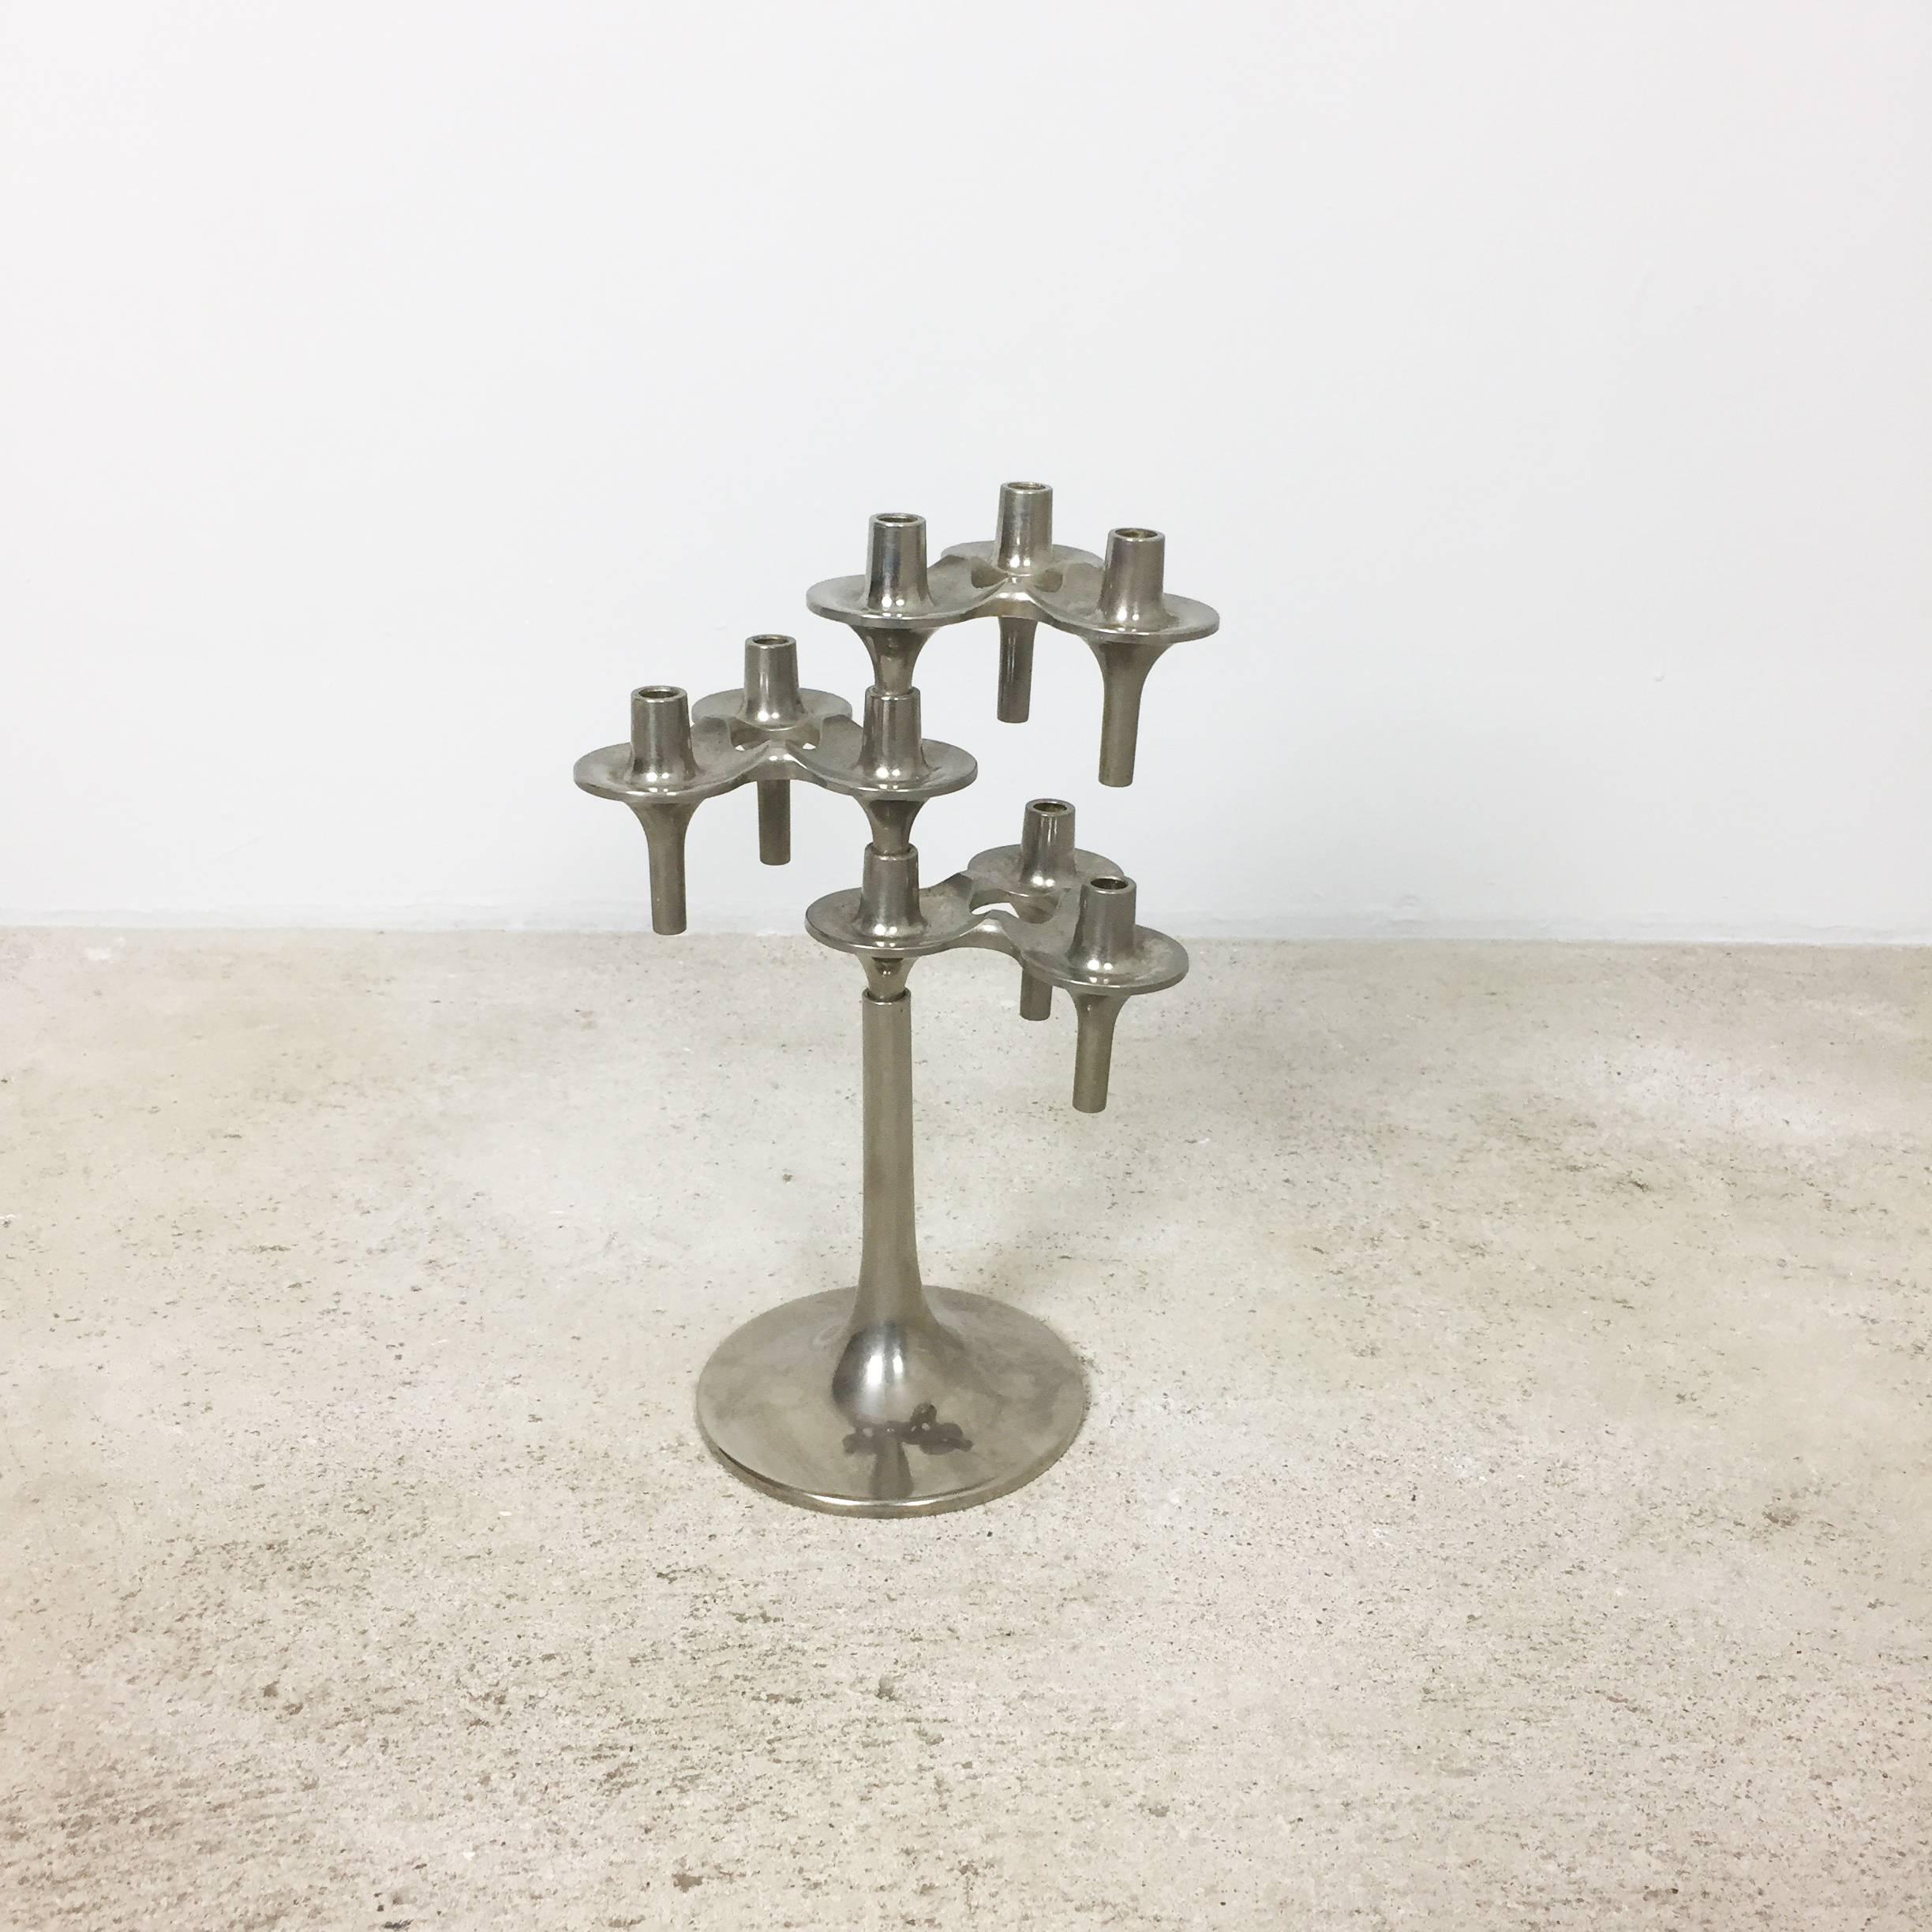 Article:

Metal candleholder sculpture Orion series


Producer:

BMF Nagel, Germany


Design:

Caesar Stoffi


Description:

This original vintage super rare tulip base candleholder element, was produced in the 1970s in Germany by